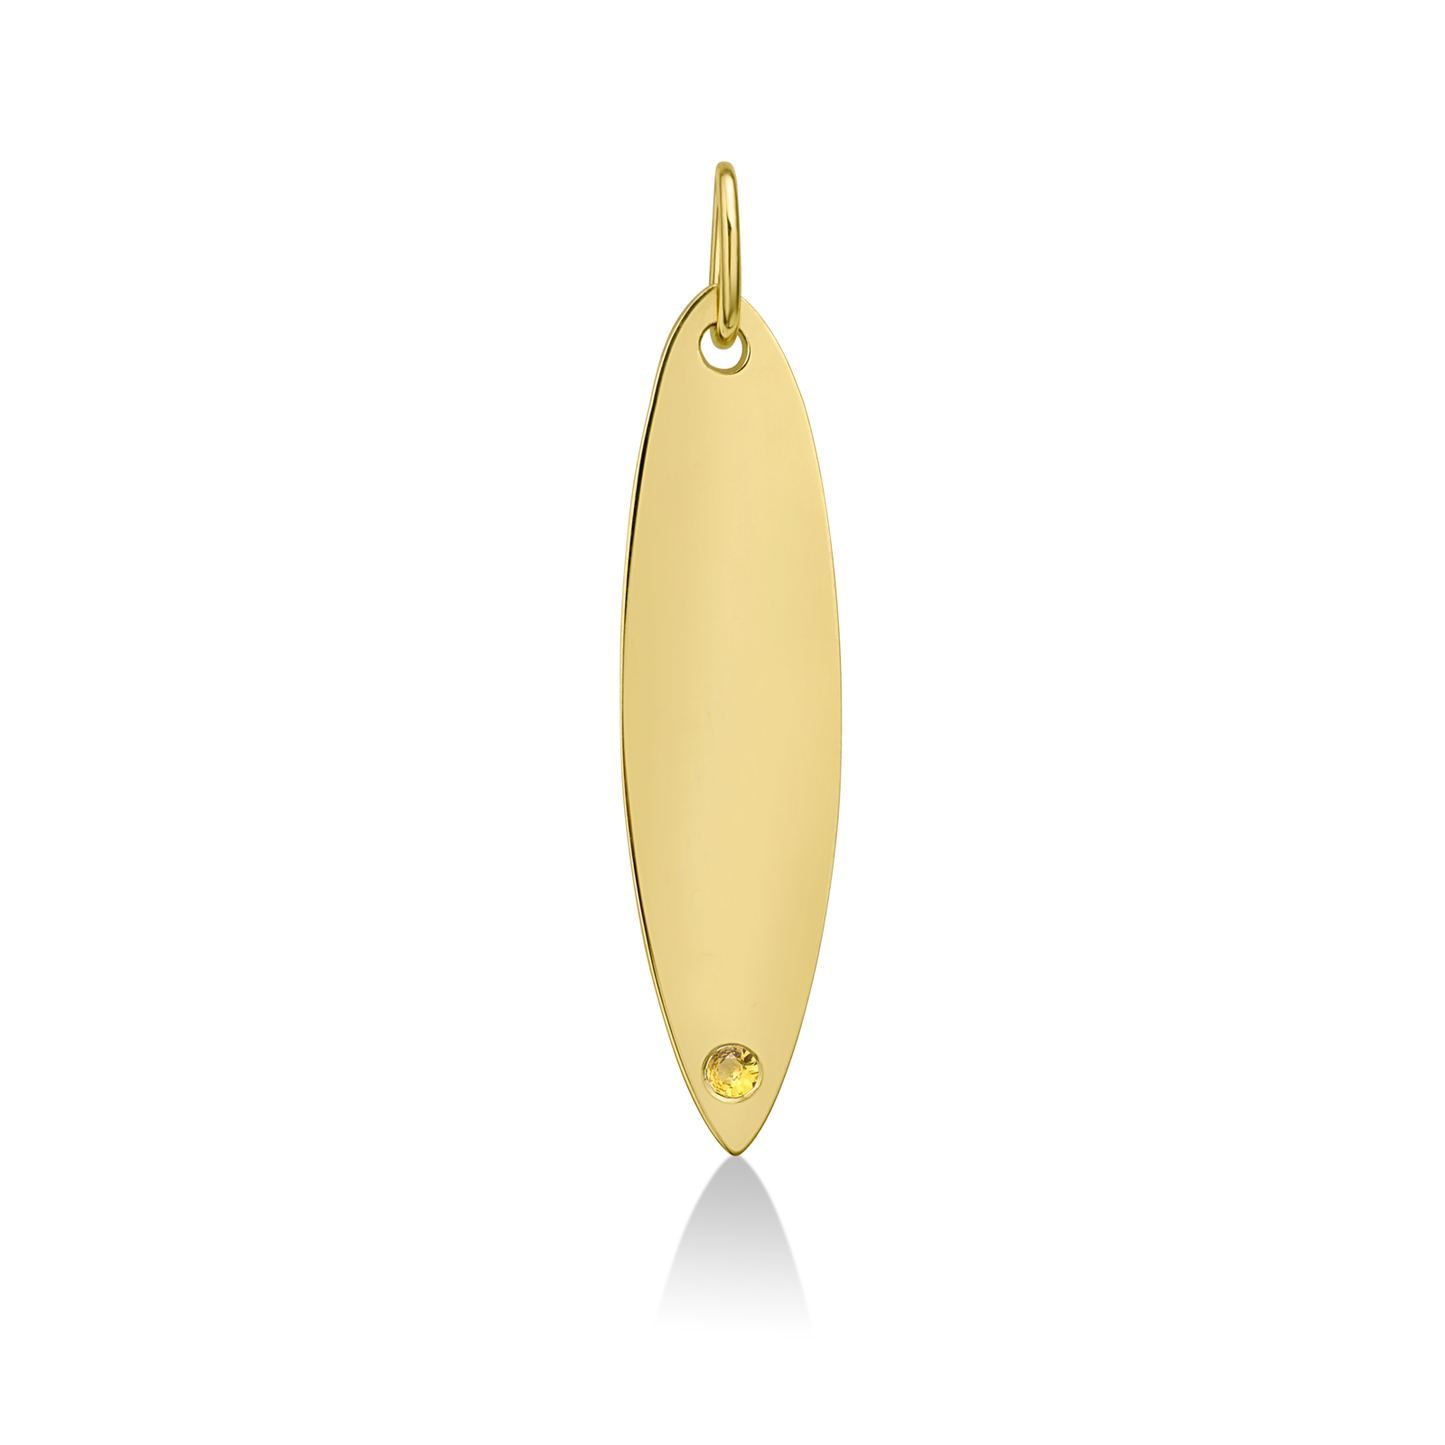 14k gold surfboard charm lock with yellow topaz